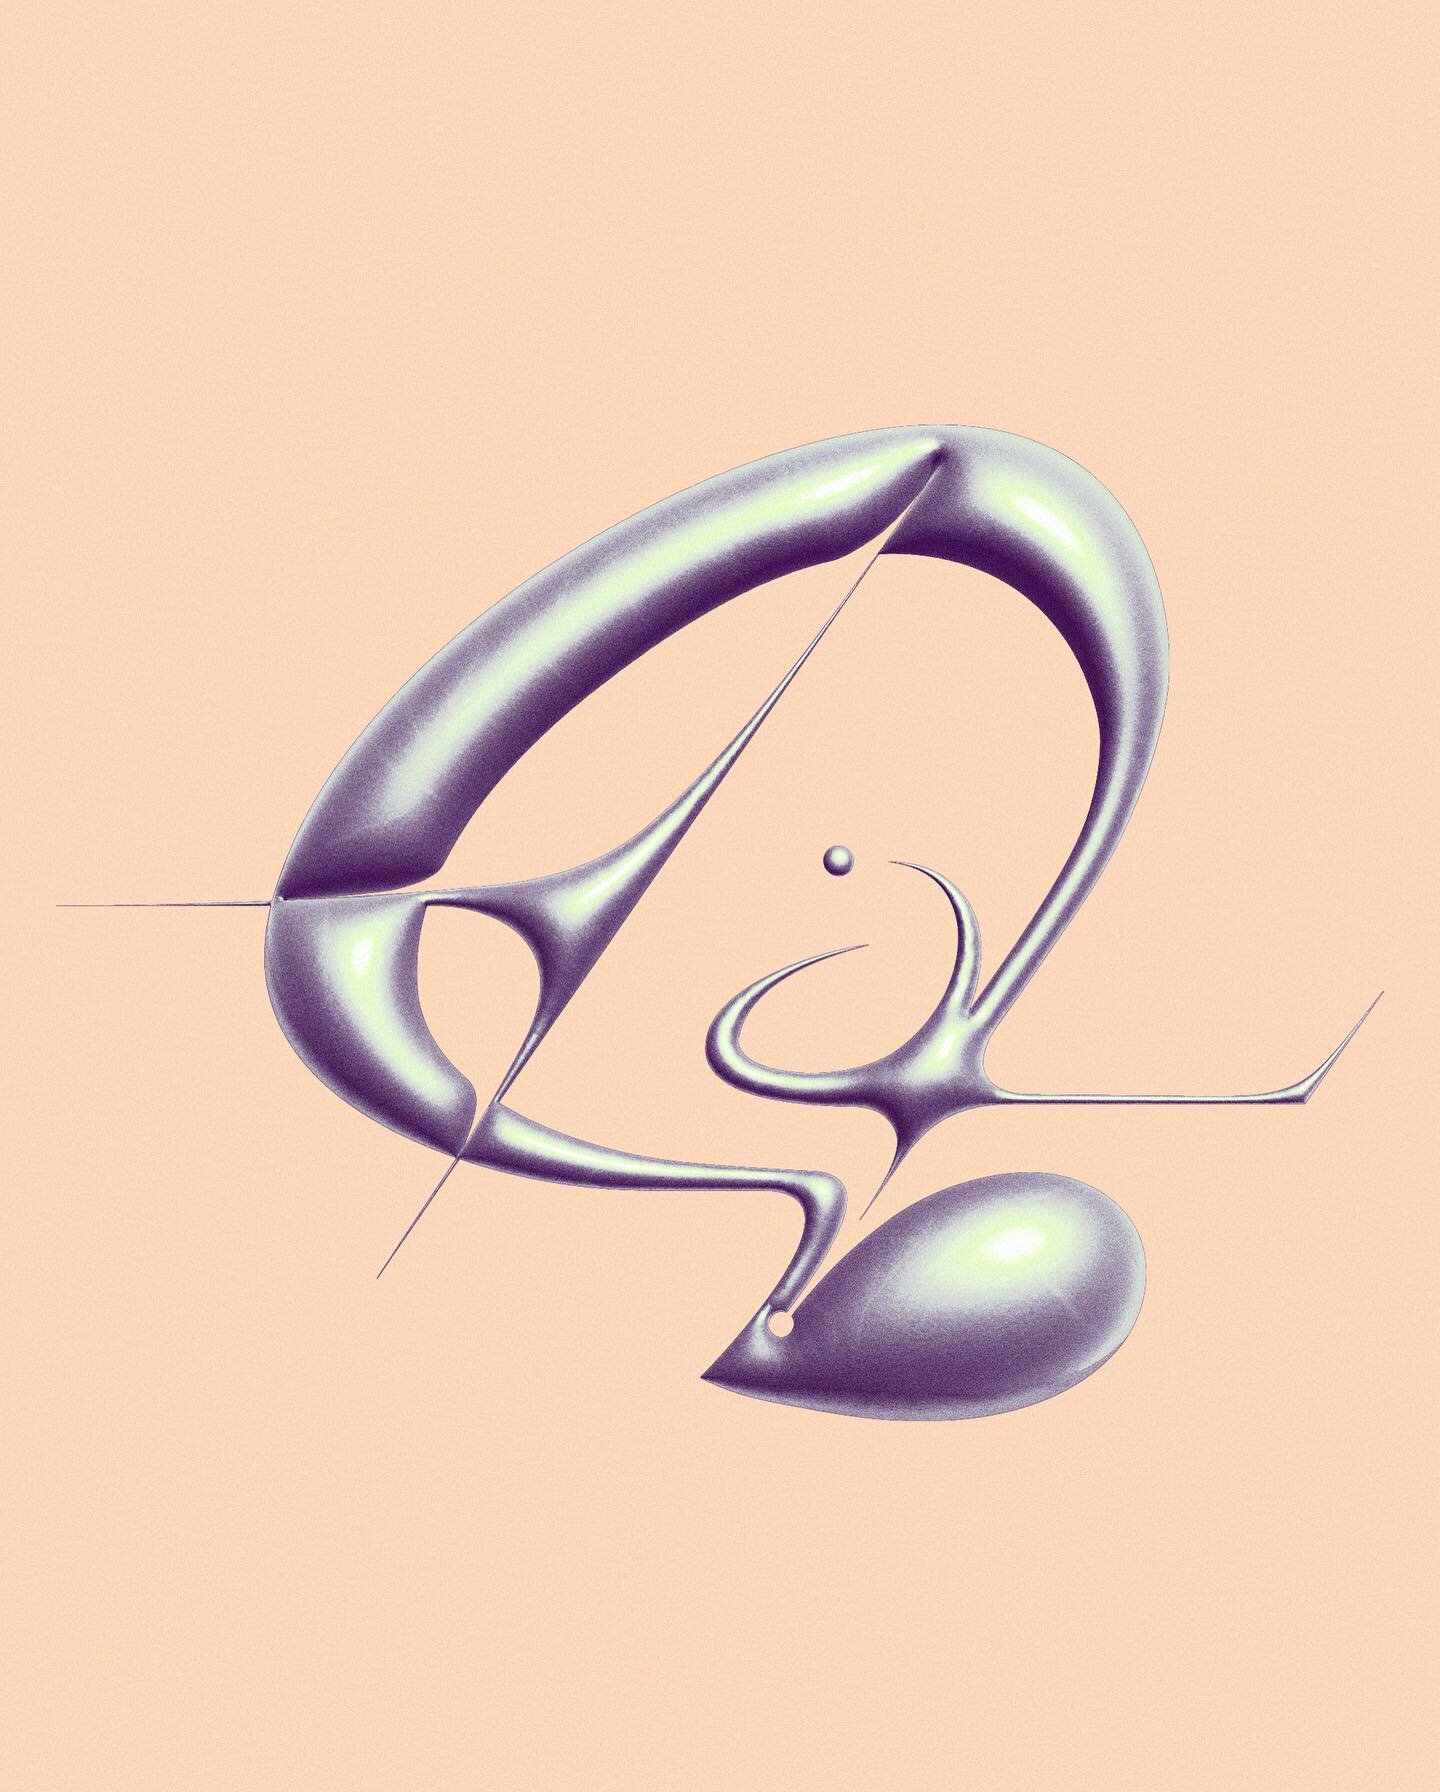 𝑸

#36days_Q #36daysoftype #36daysoftype10
I initially had trouble not having this look like a letter G, but once I got it... I got it 😈 

Also played around with some of the 3d settings after seeing @ar1sing doing so as well, and I loooooved the s